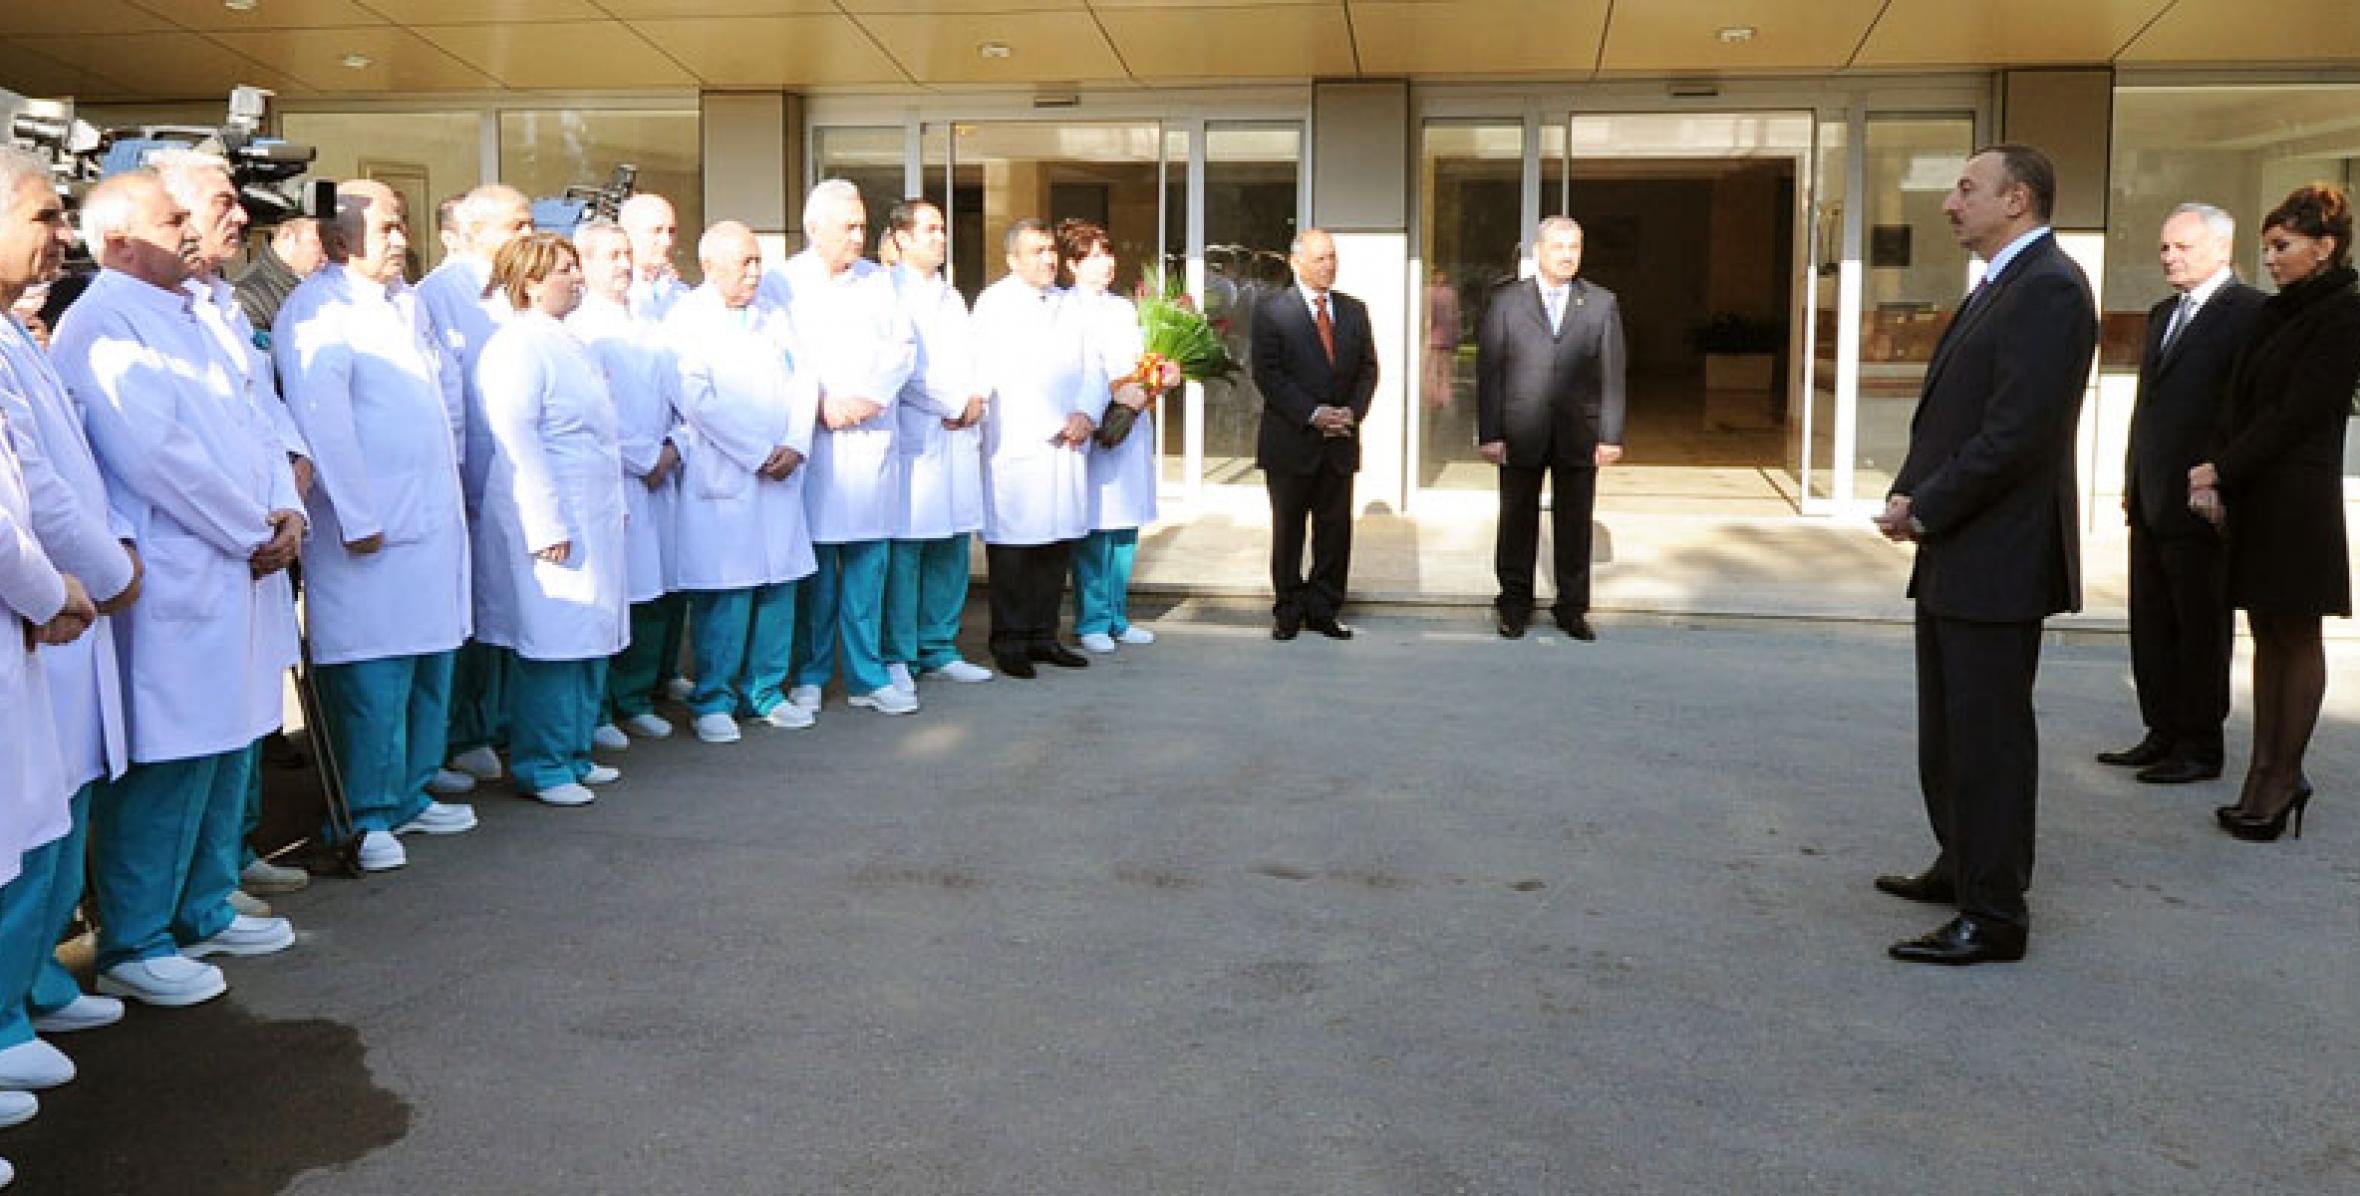 Ilham Aliyev familiarized himself with the restoration work at the Scientific Surgical Centre